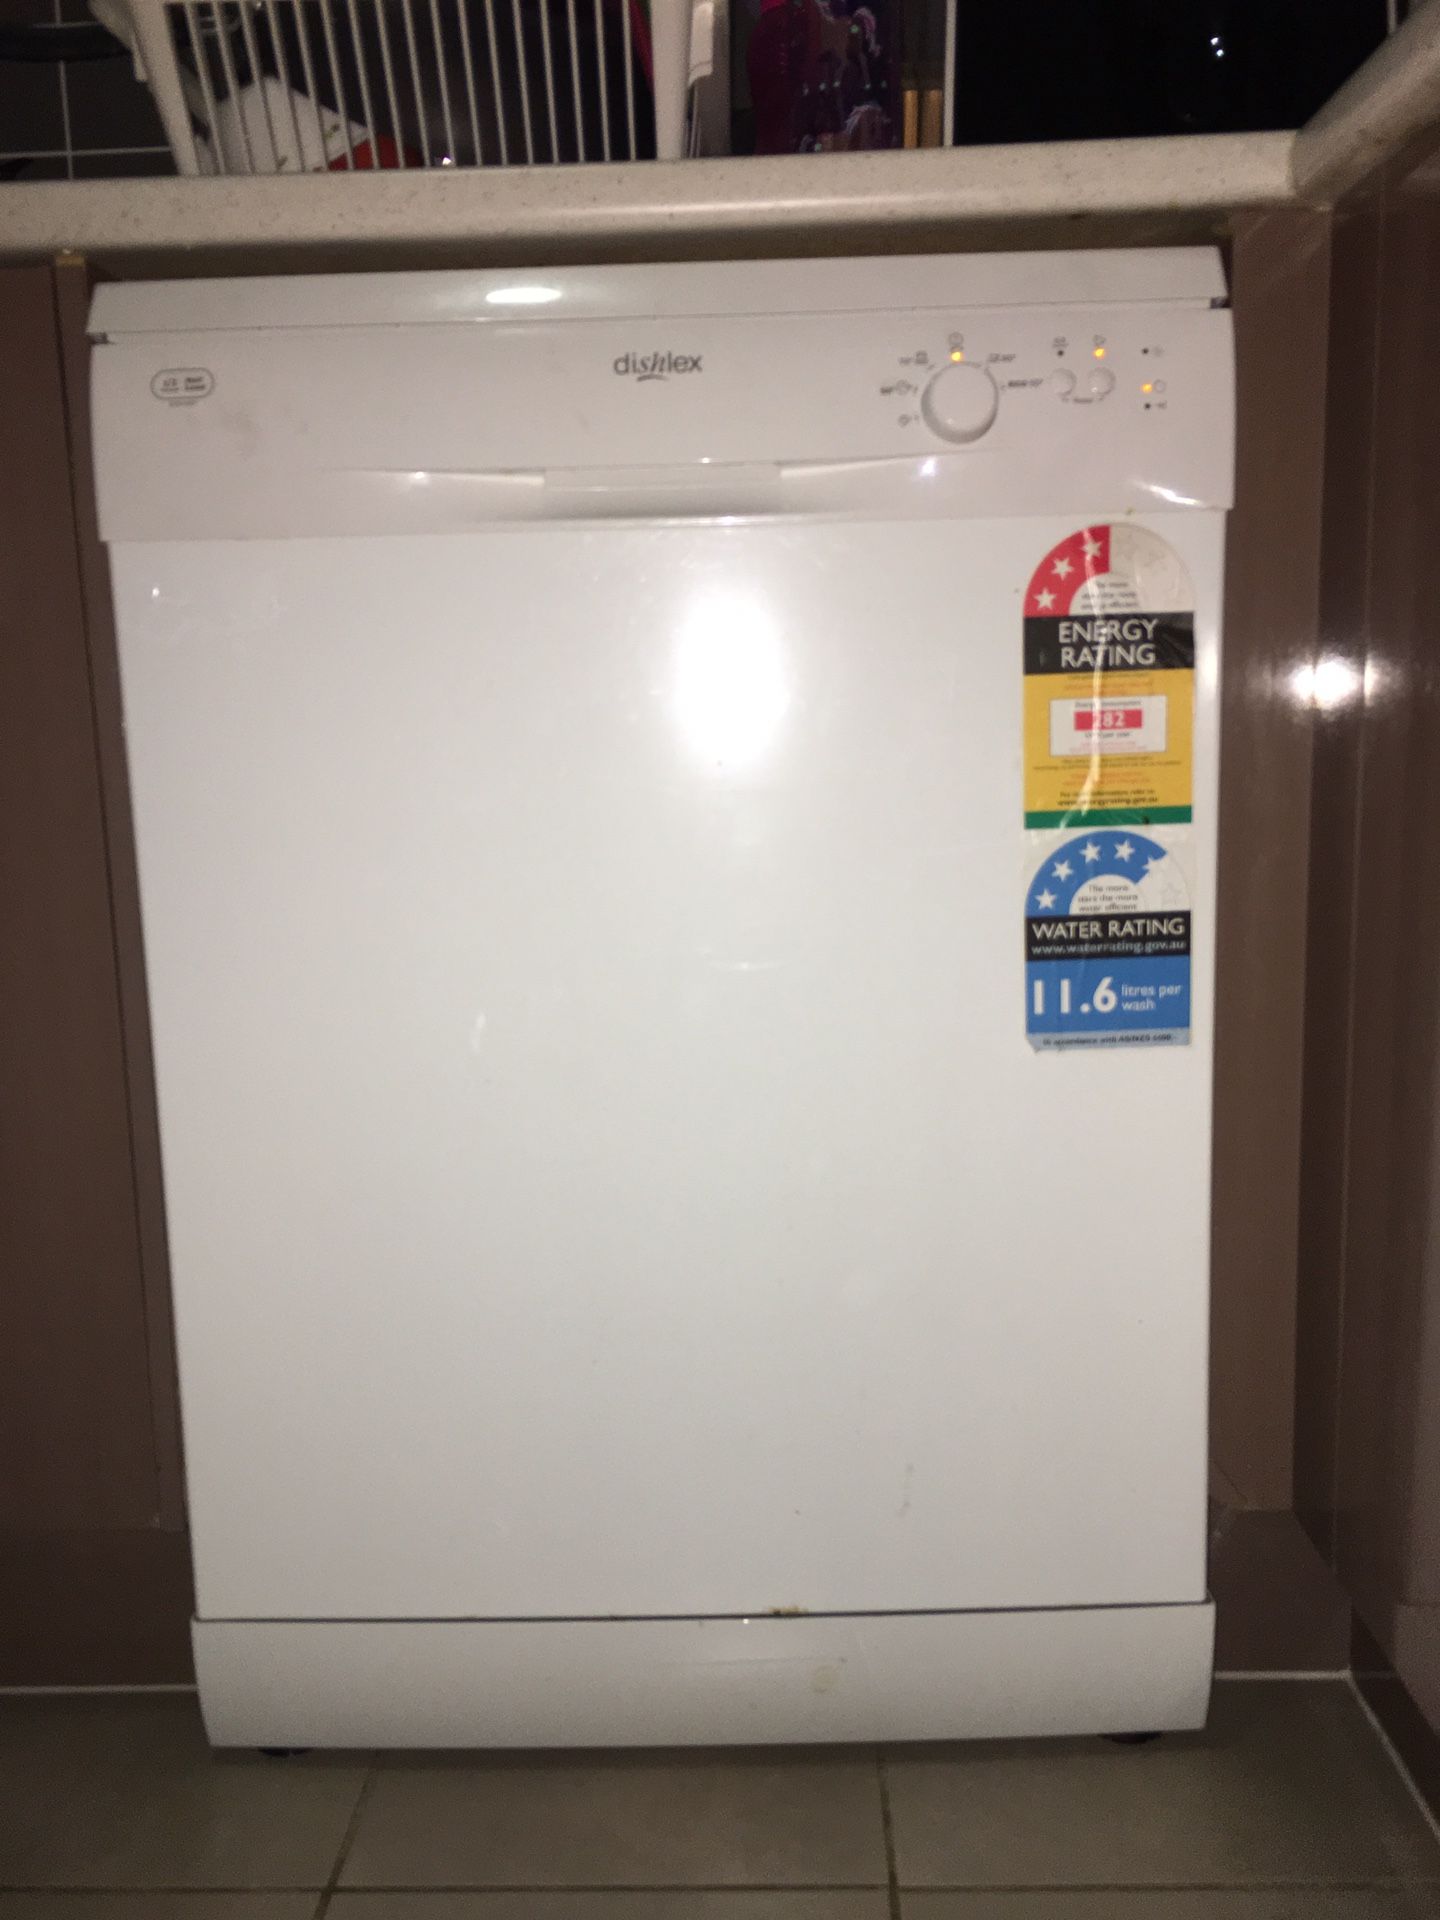 Dish washer 240V 50HZ used in Austraila for 2 years